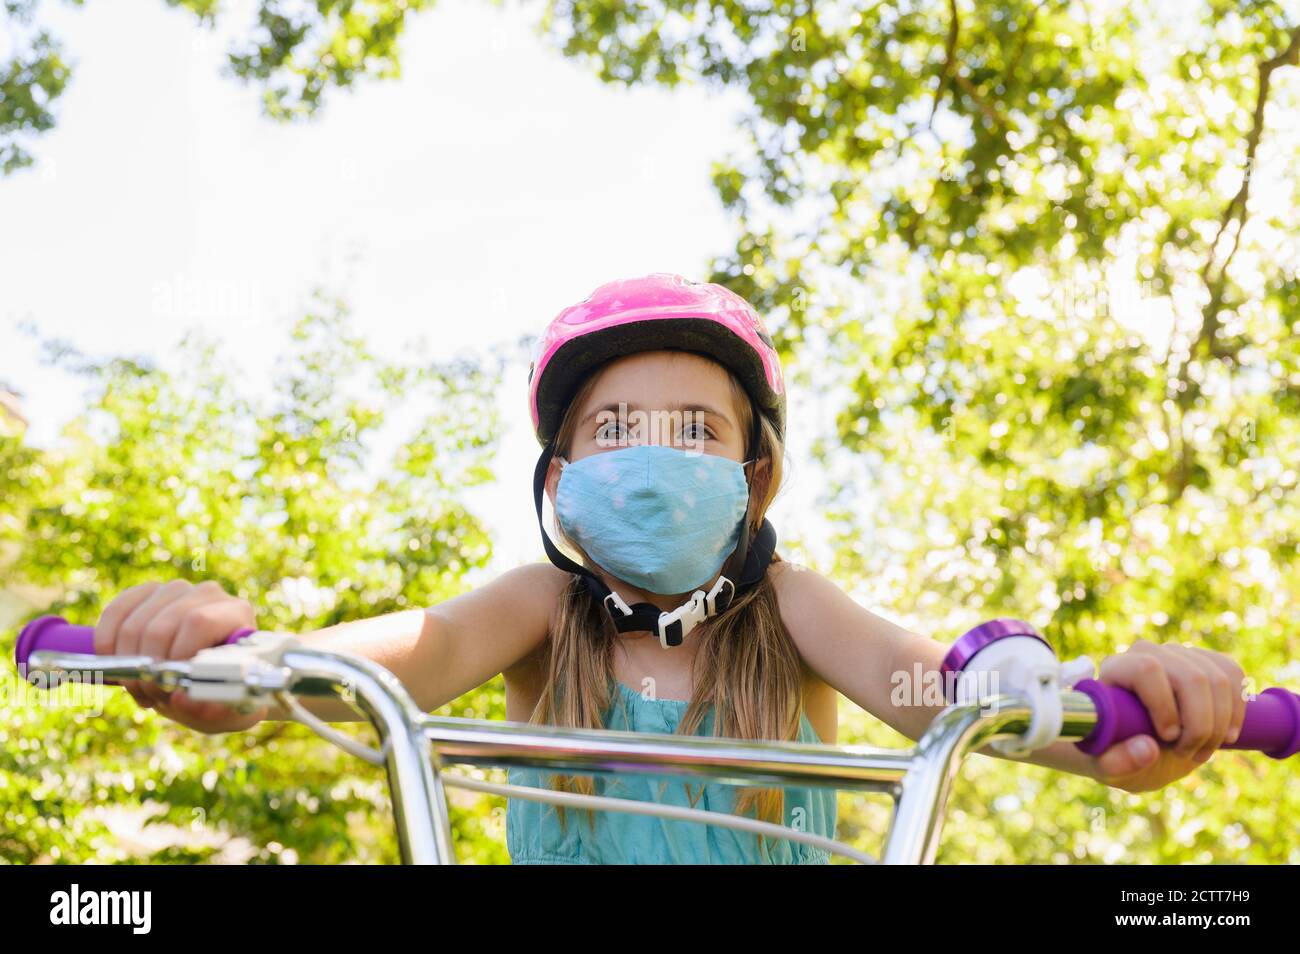 Girl (6-7) wearing flu mask and riding bicycle Stock Photo